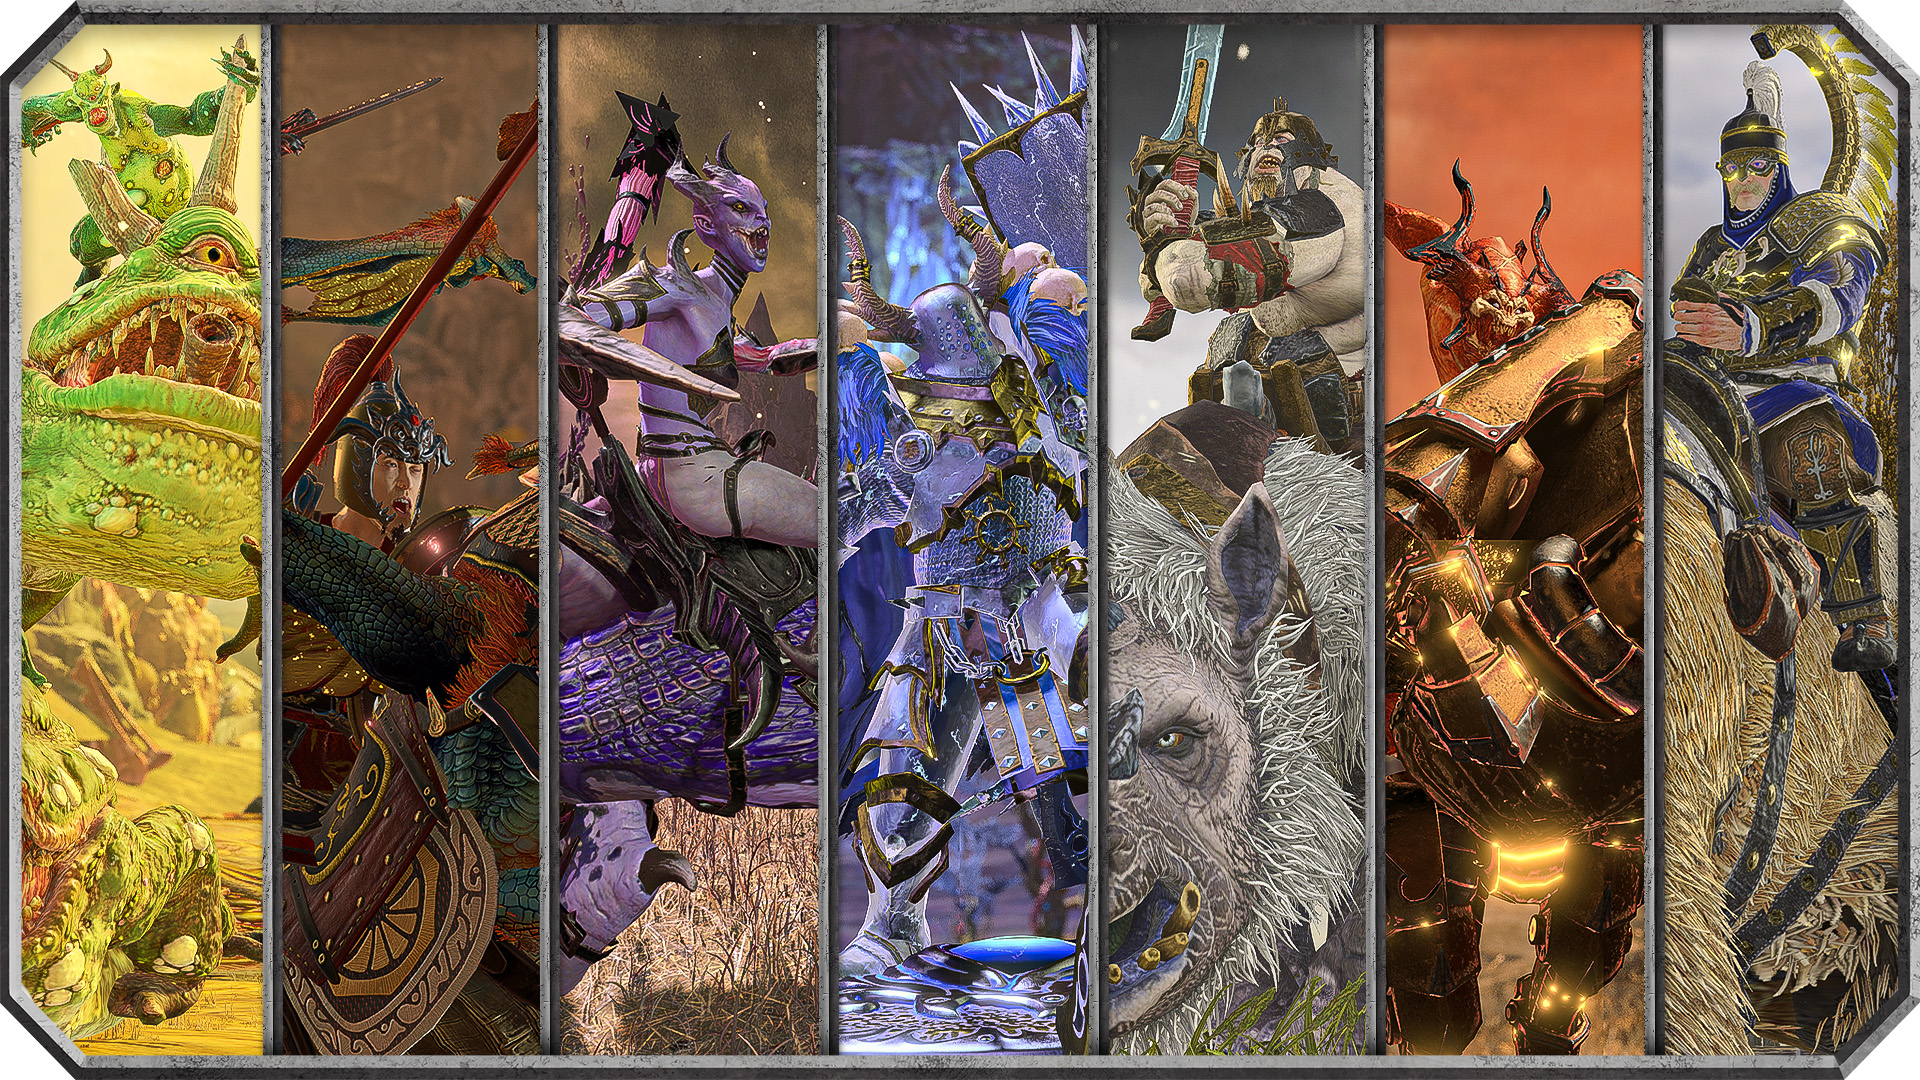 A line-up of the seven new units being added in the Regiments of Renown II unit pack. From left to right: the Barons of the Bog, Lances of Wei-Jin, Eternal Entorage, Knights of Immolation, Sky Striders, Heralds of Khorne's Fury, and Oath-Brothers of Tor.